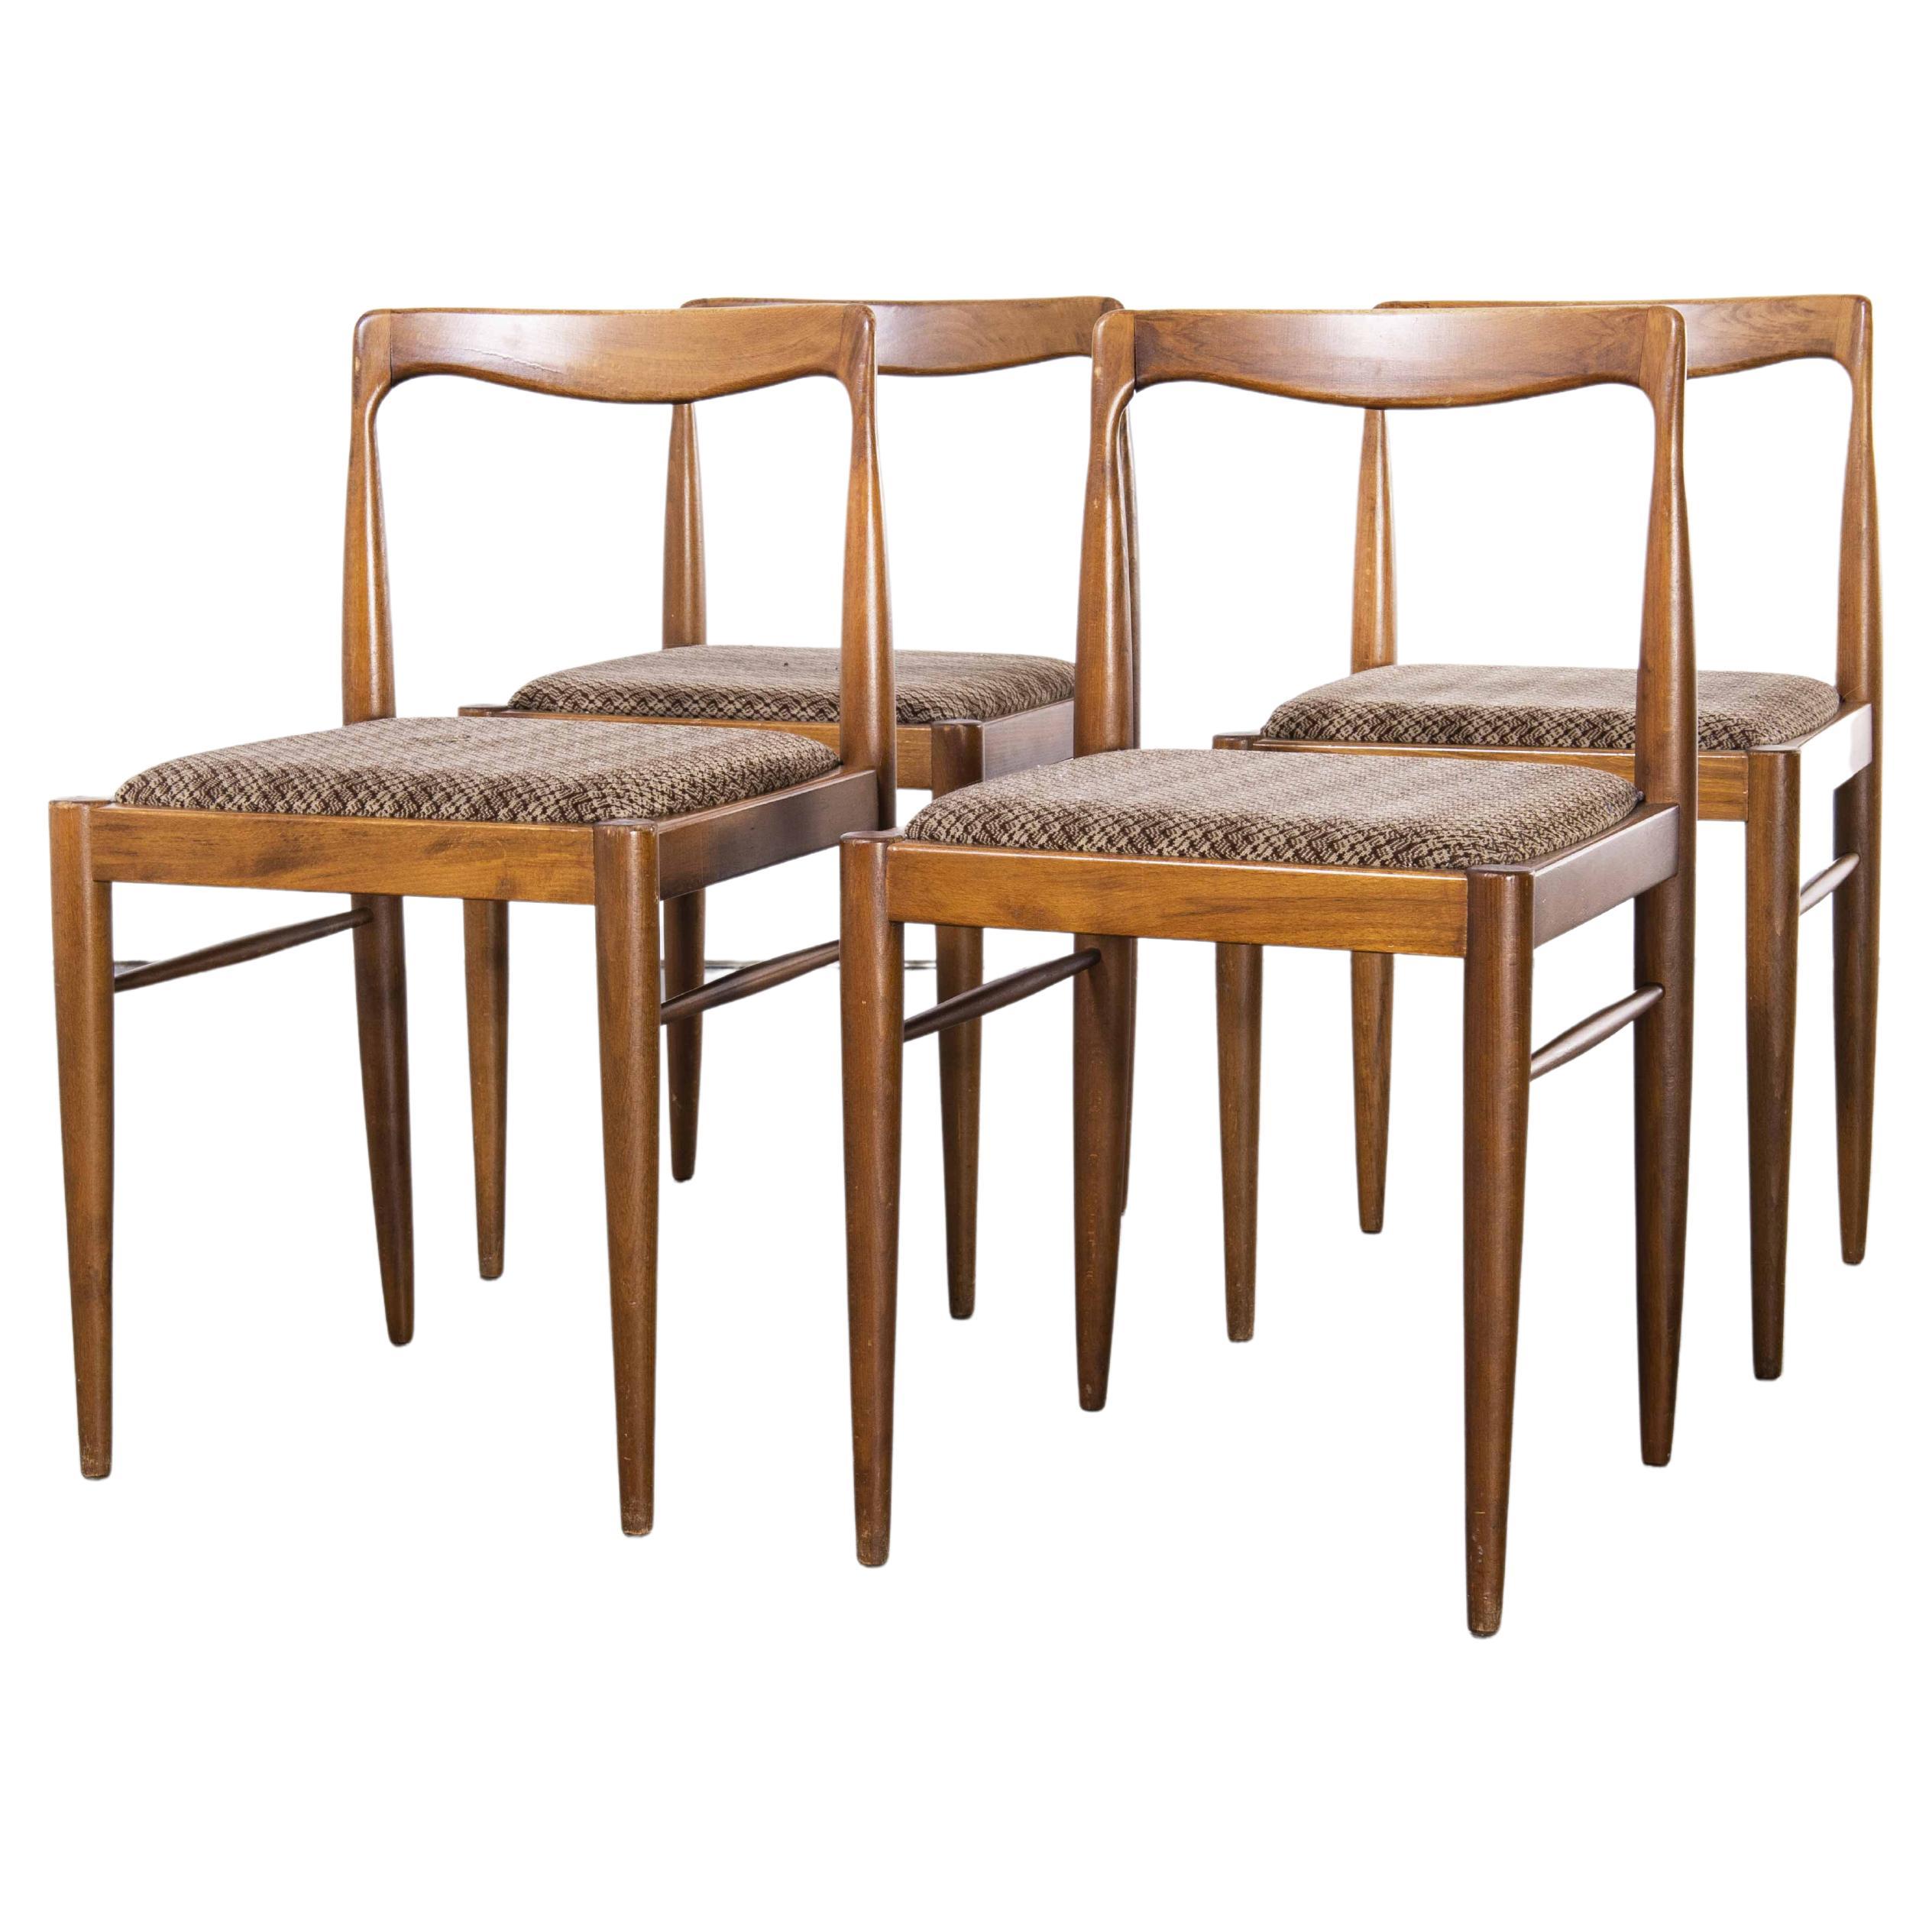 1950's Mid Century Teak Dining Chairs, Set of Four